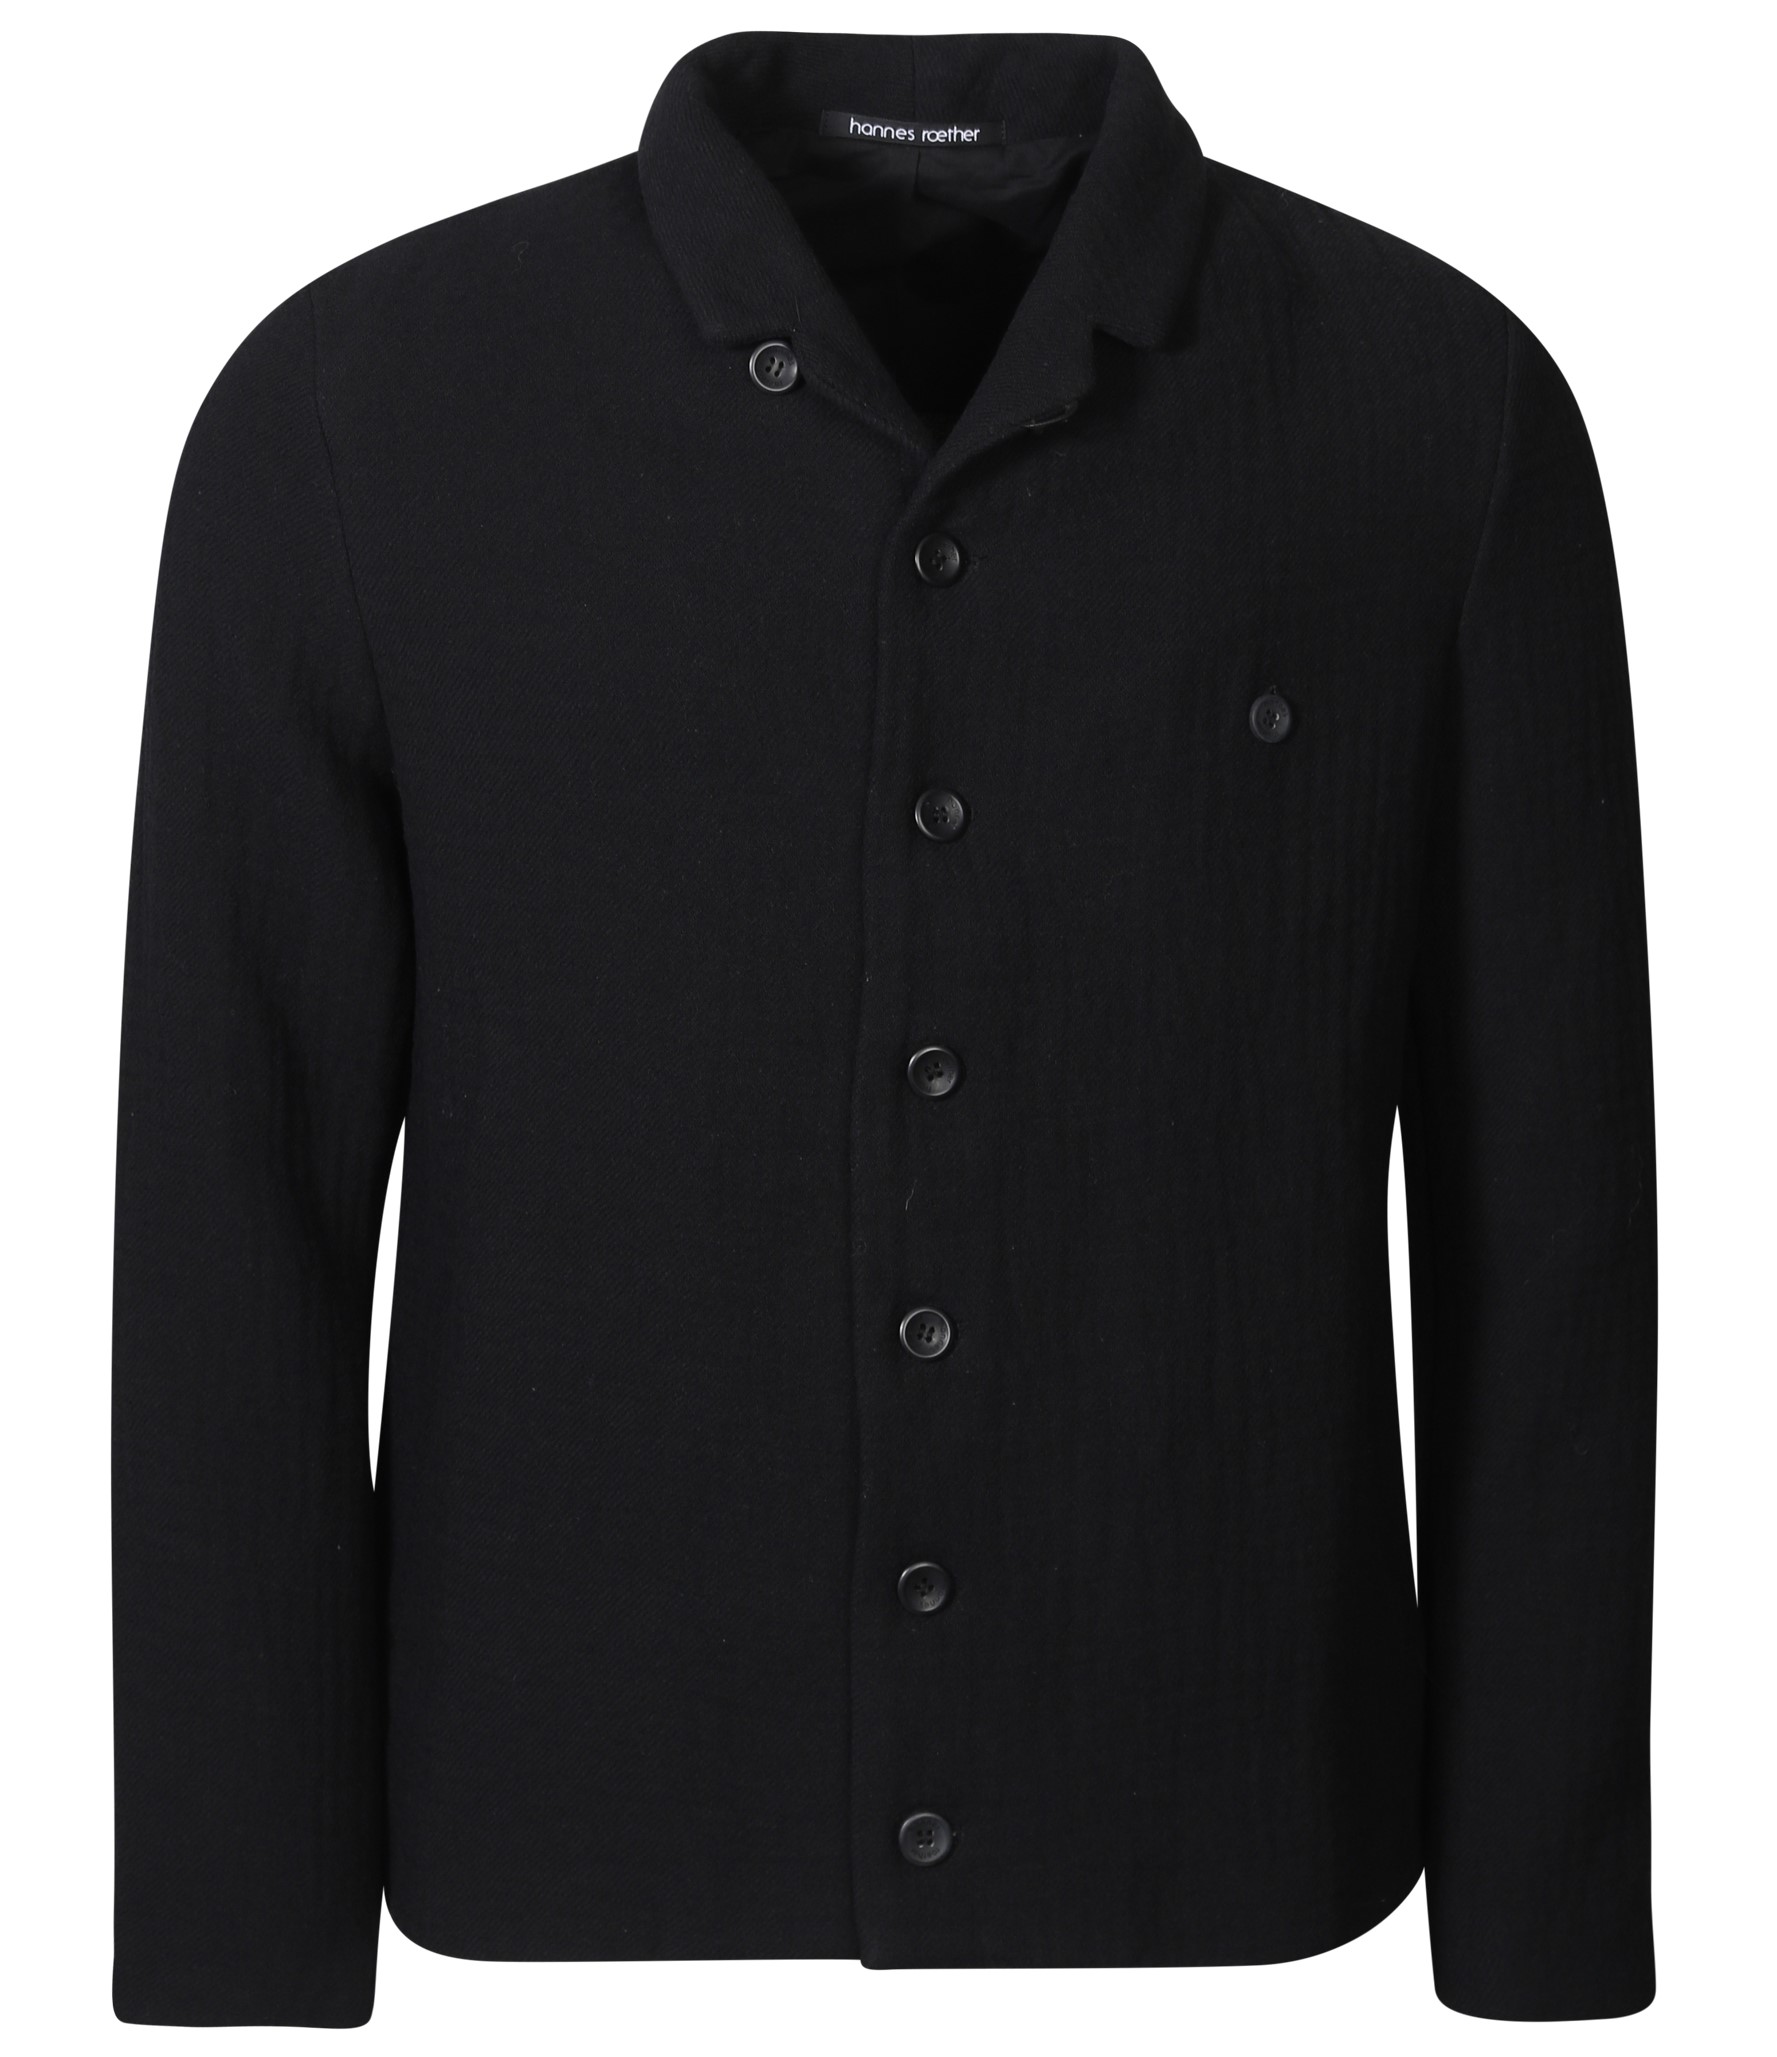 HANNES ROETHER Cotton Wool Jacket in Black